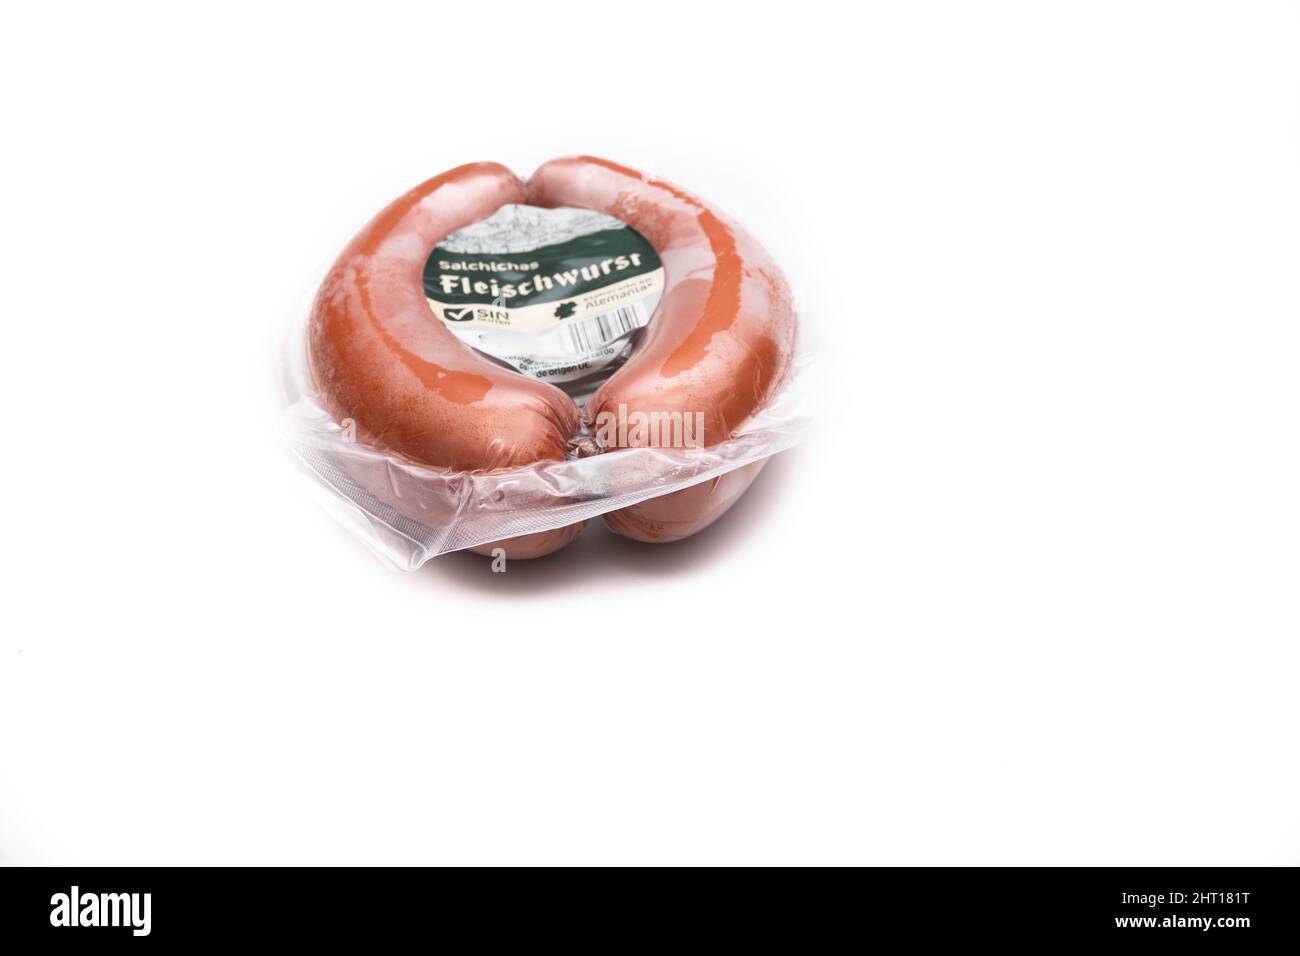 images fleischwurst hi-res Alamy and - photography Packaged stock